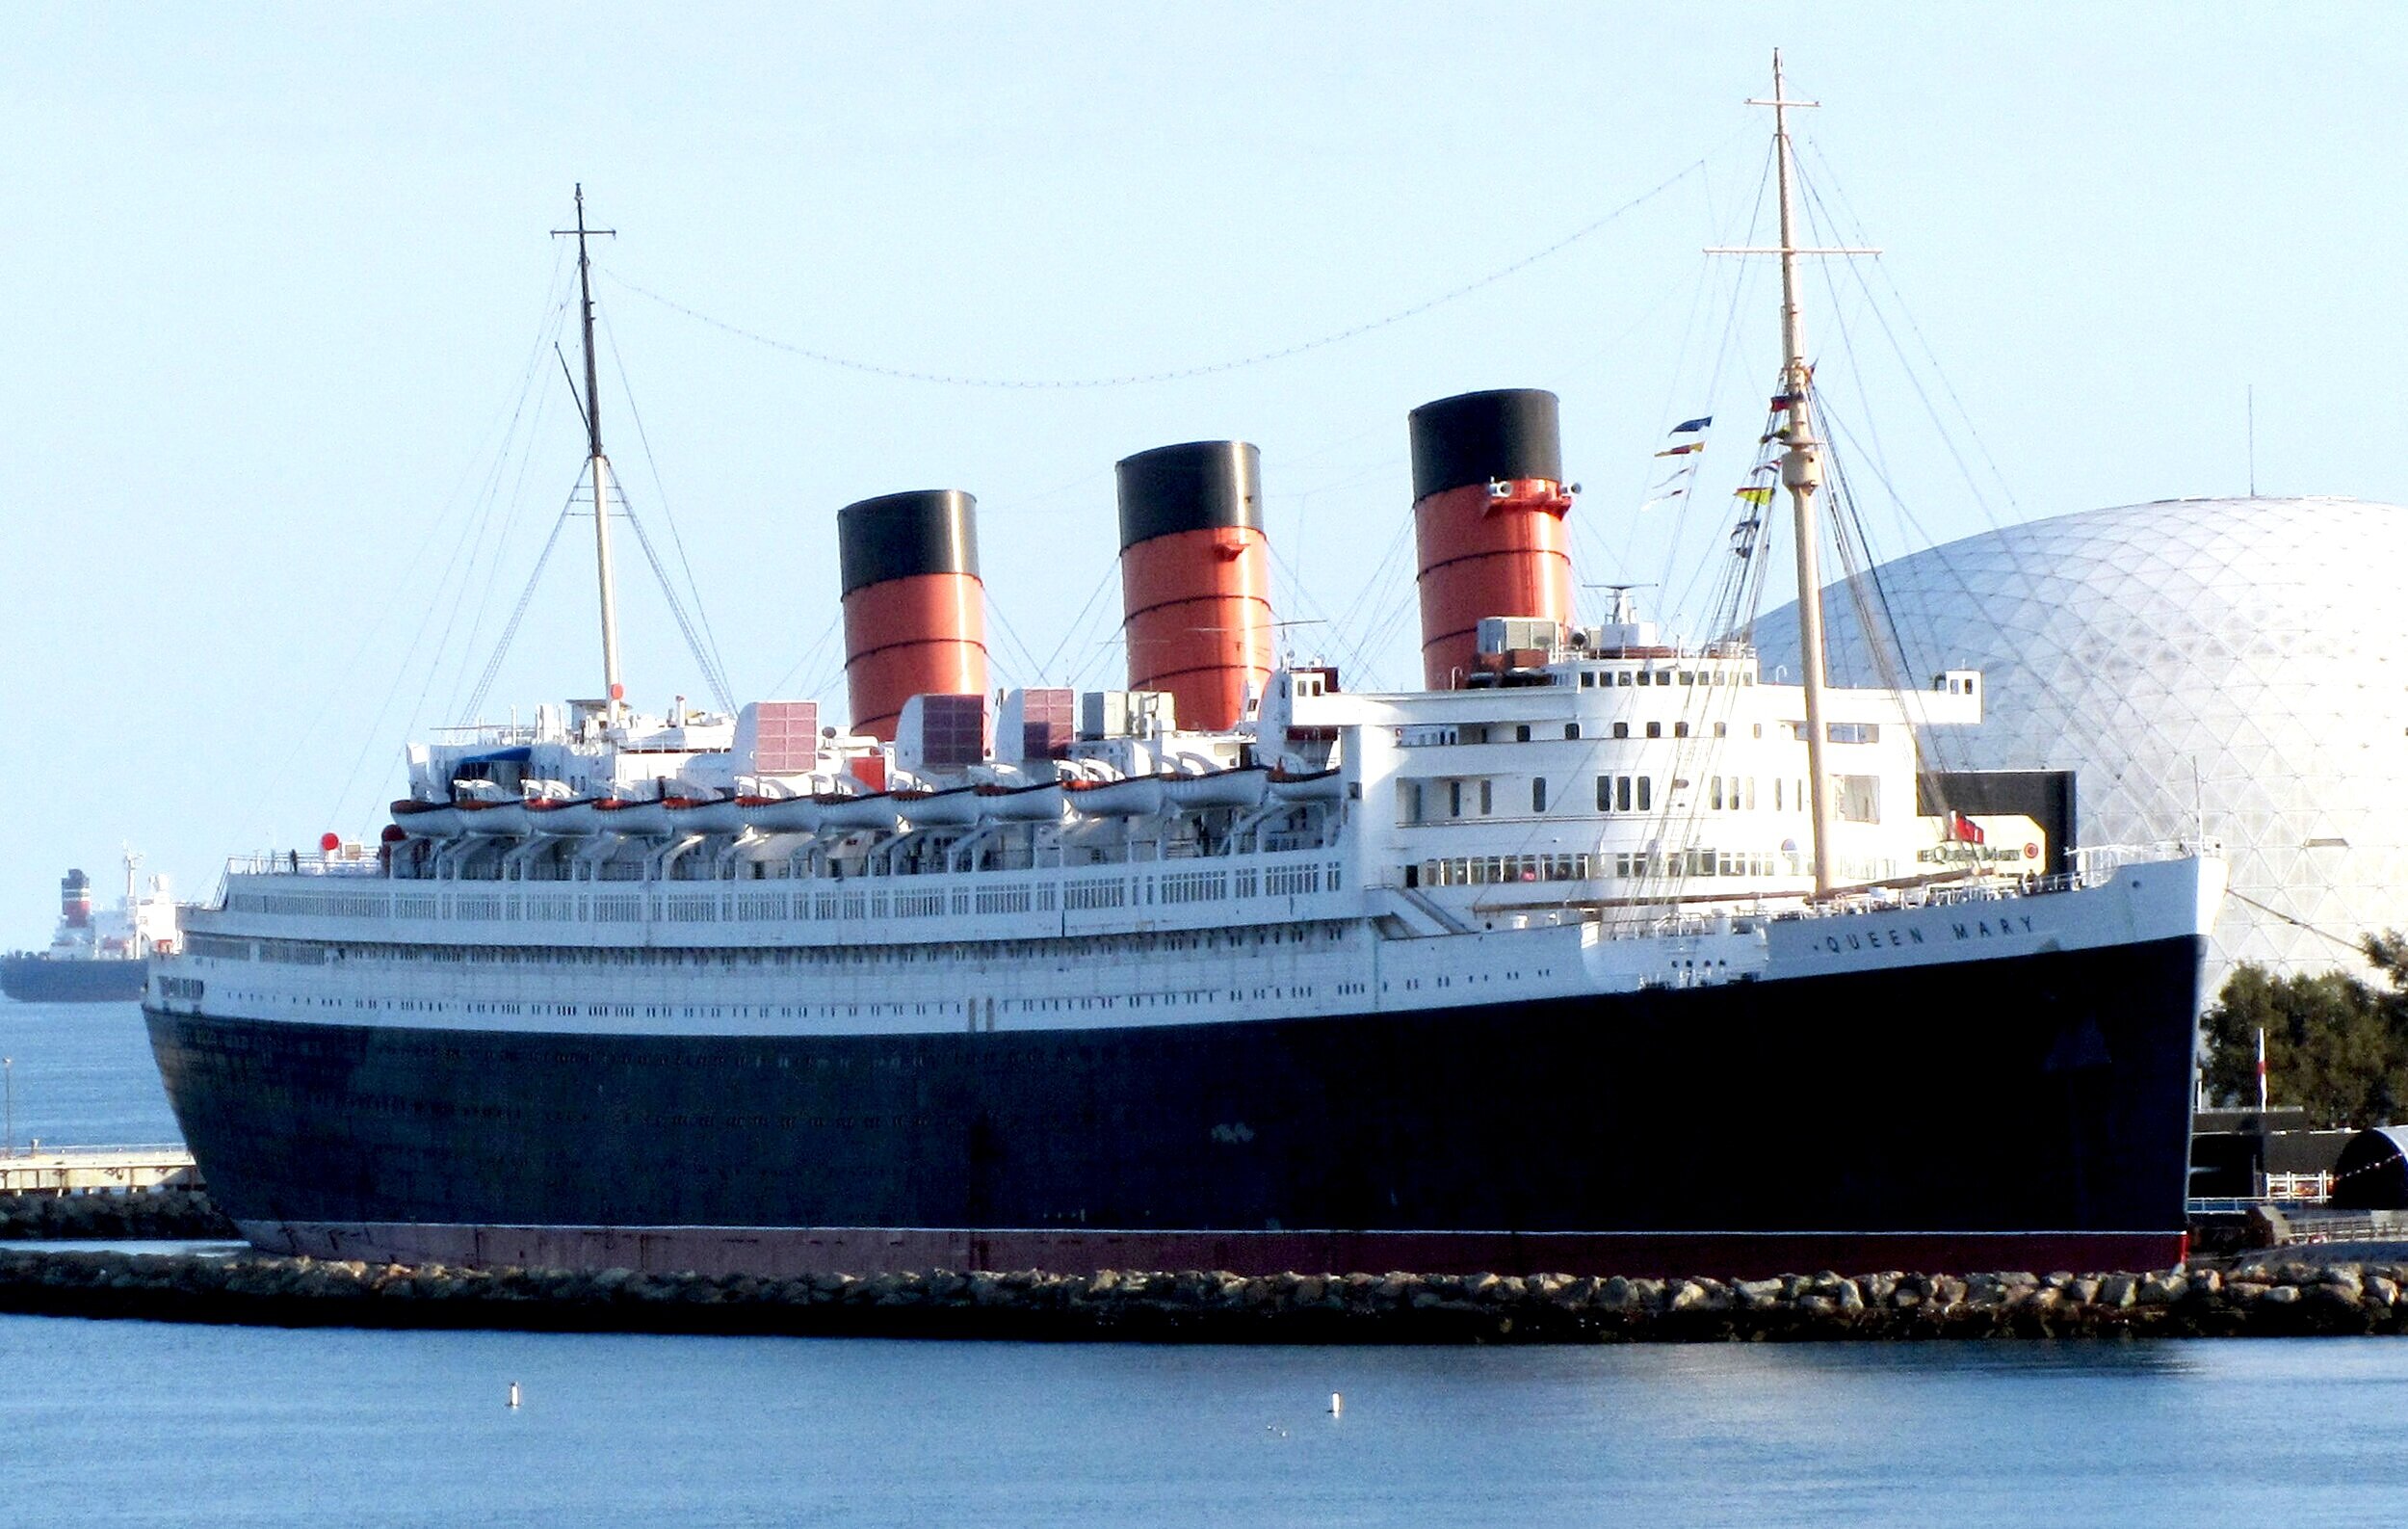 A Halloween Queen Mary? By Commodore Everette Hoard — Palos Verdes Pulse